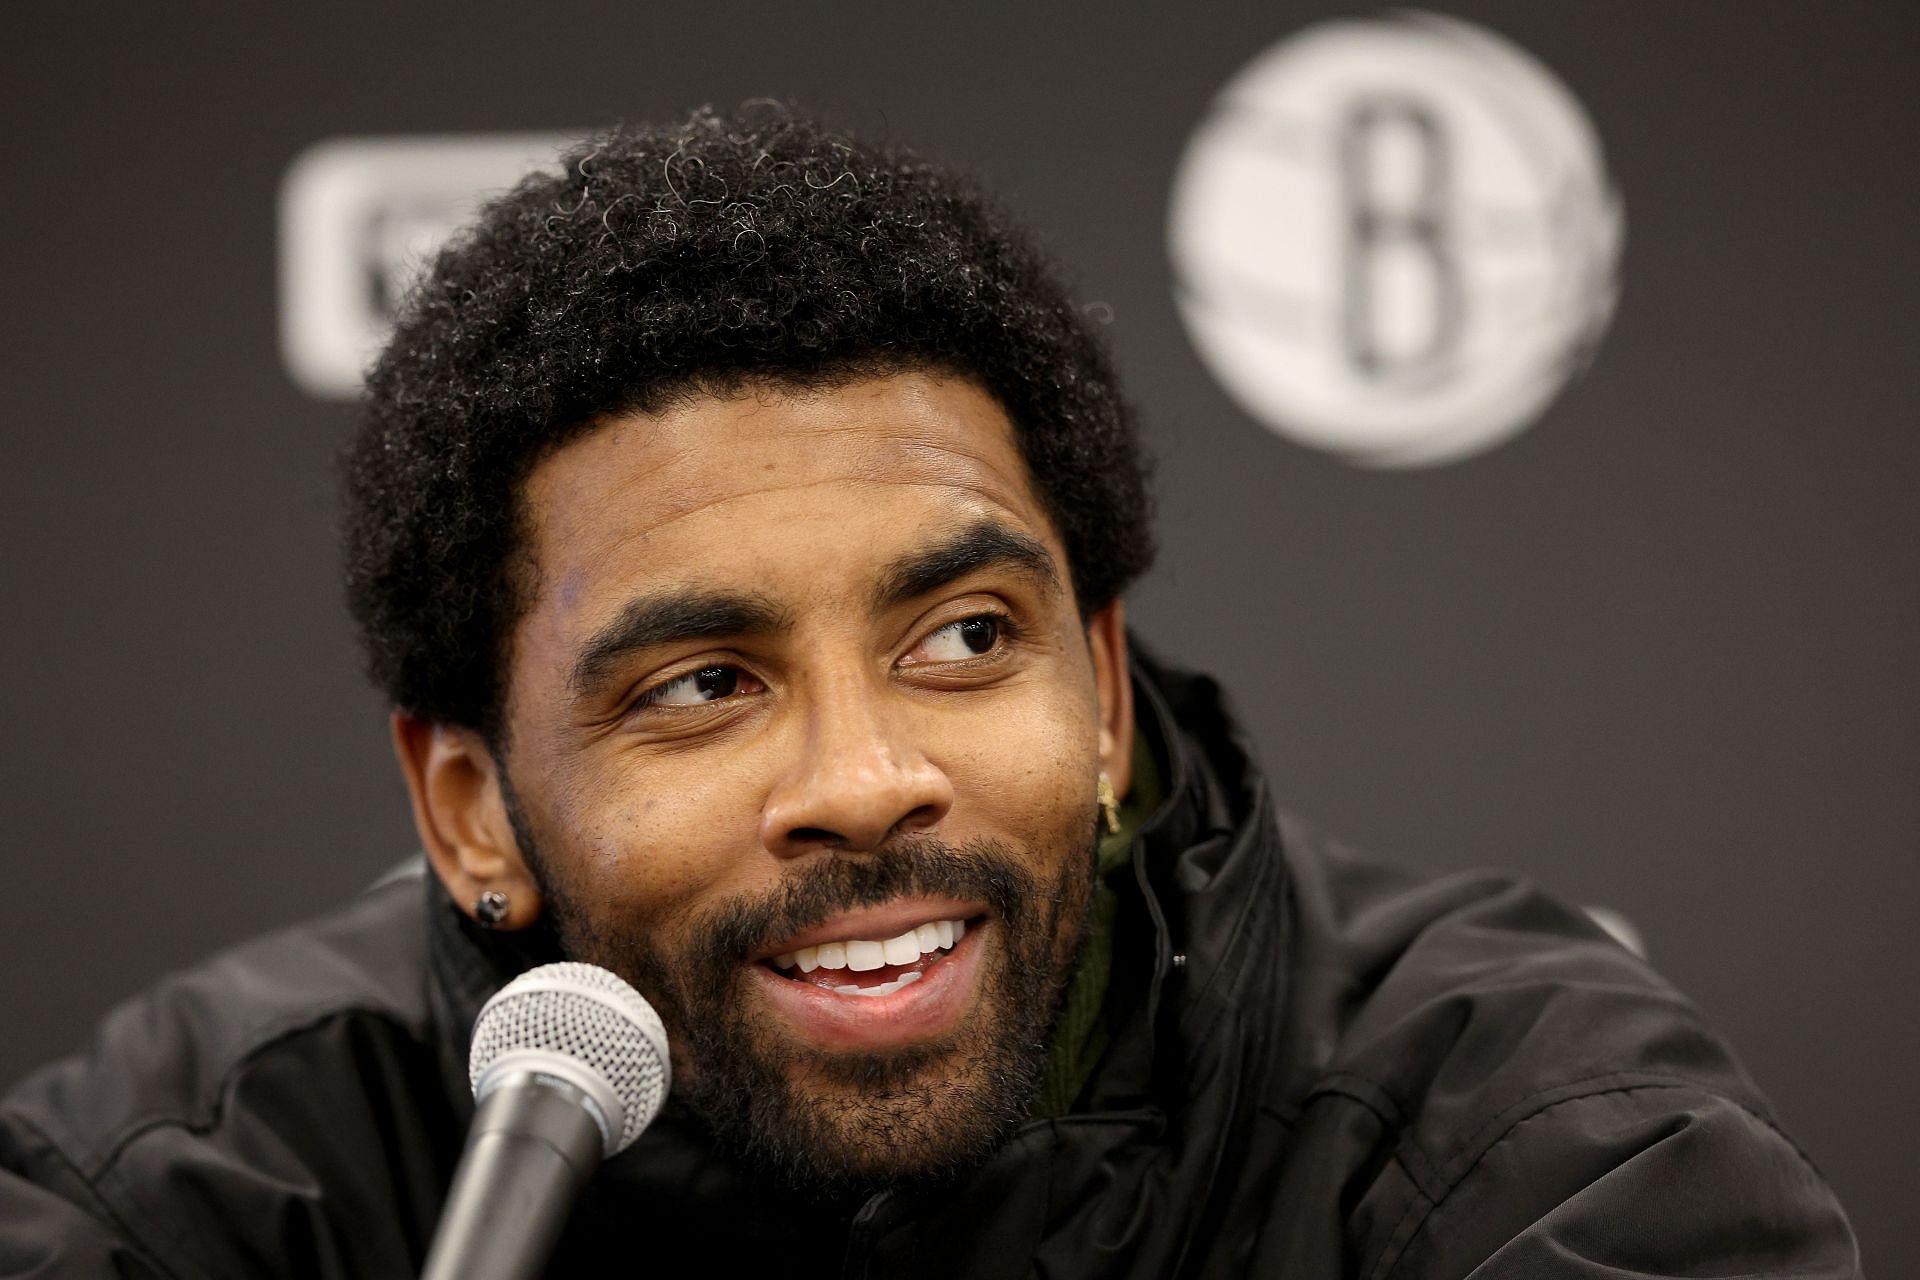 Kyrie Irving #11of the Brooklyn Nets talks to the media following the game against the Indiana Pacers at Gainbridge Fieldhouse on January 05, 2022 in Indianapolis, Indiana.